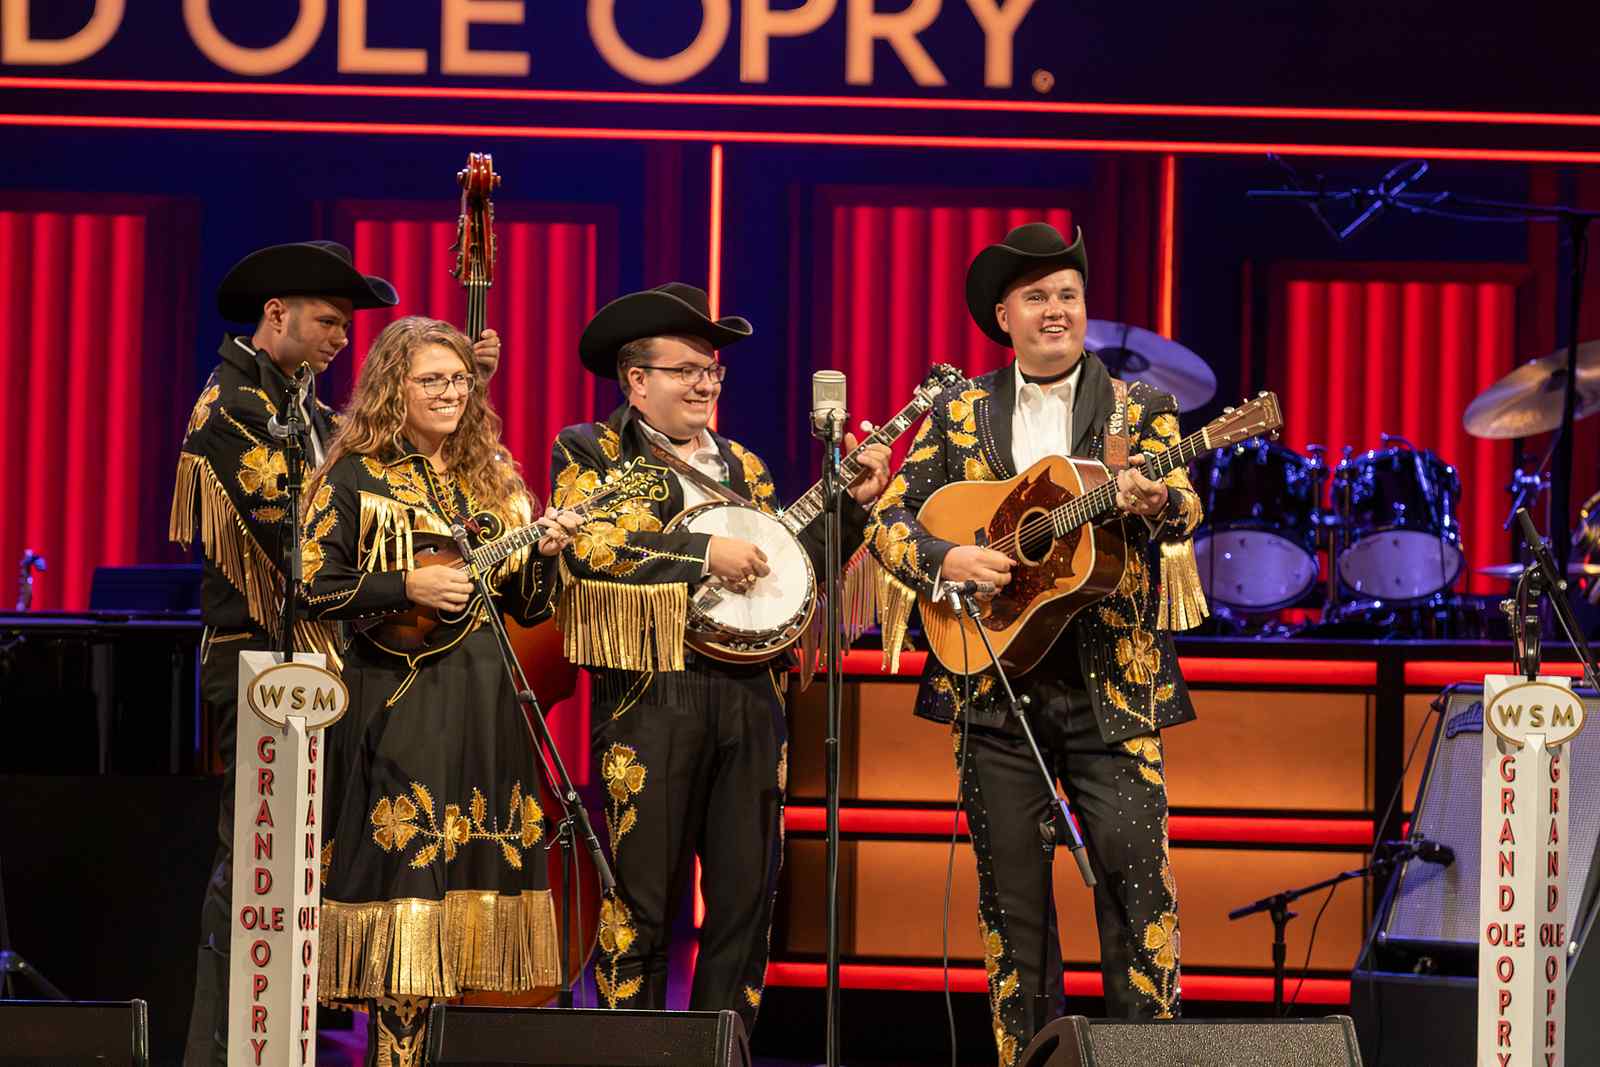 The Kody Norris Show Makes Triumphant Grand Ole Opry Debut!